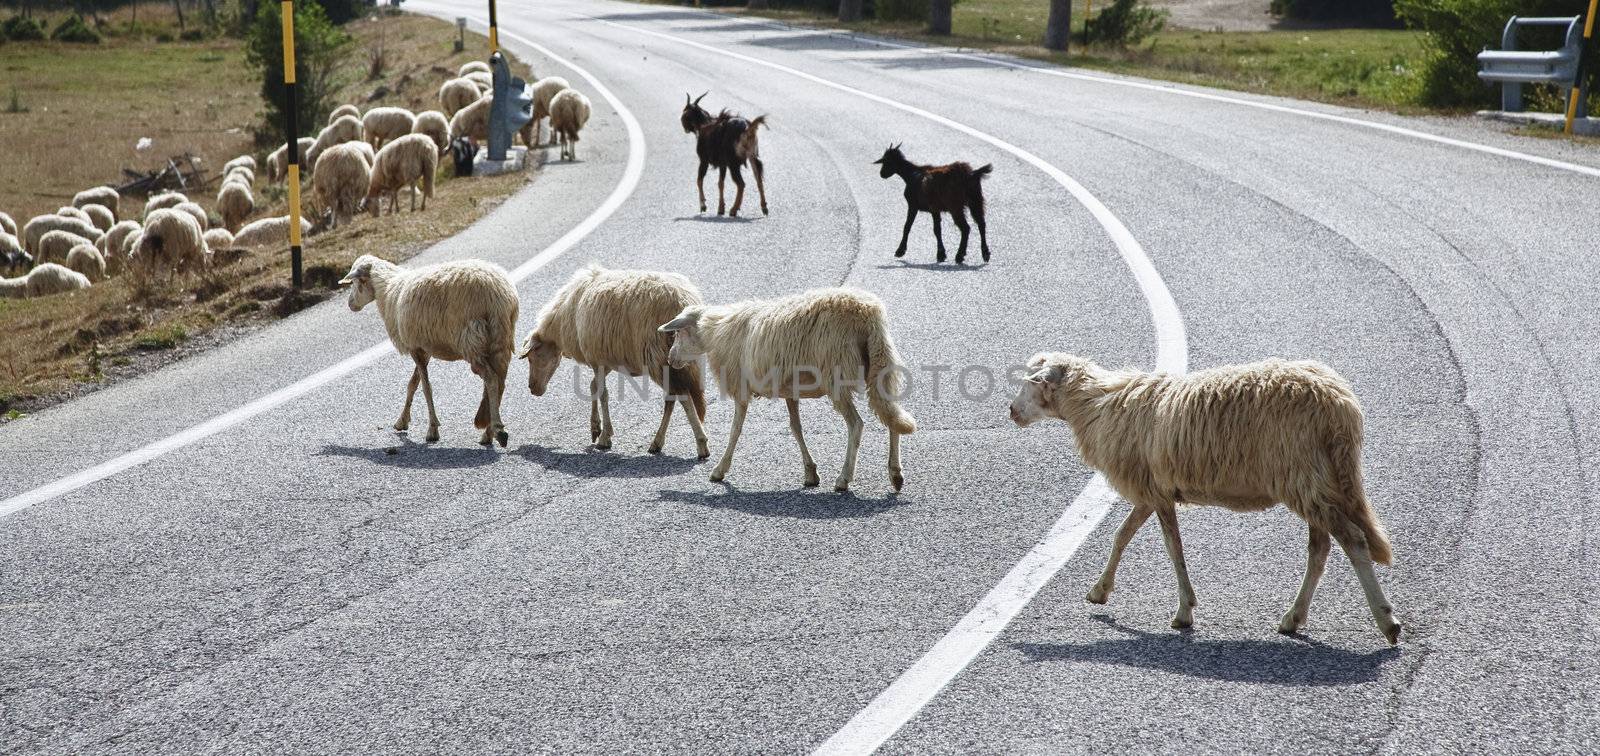 A flock of goats and sheep in and by the the road - Abruzzo, Italy.